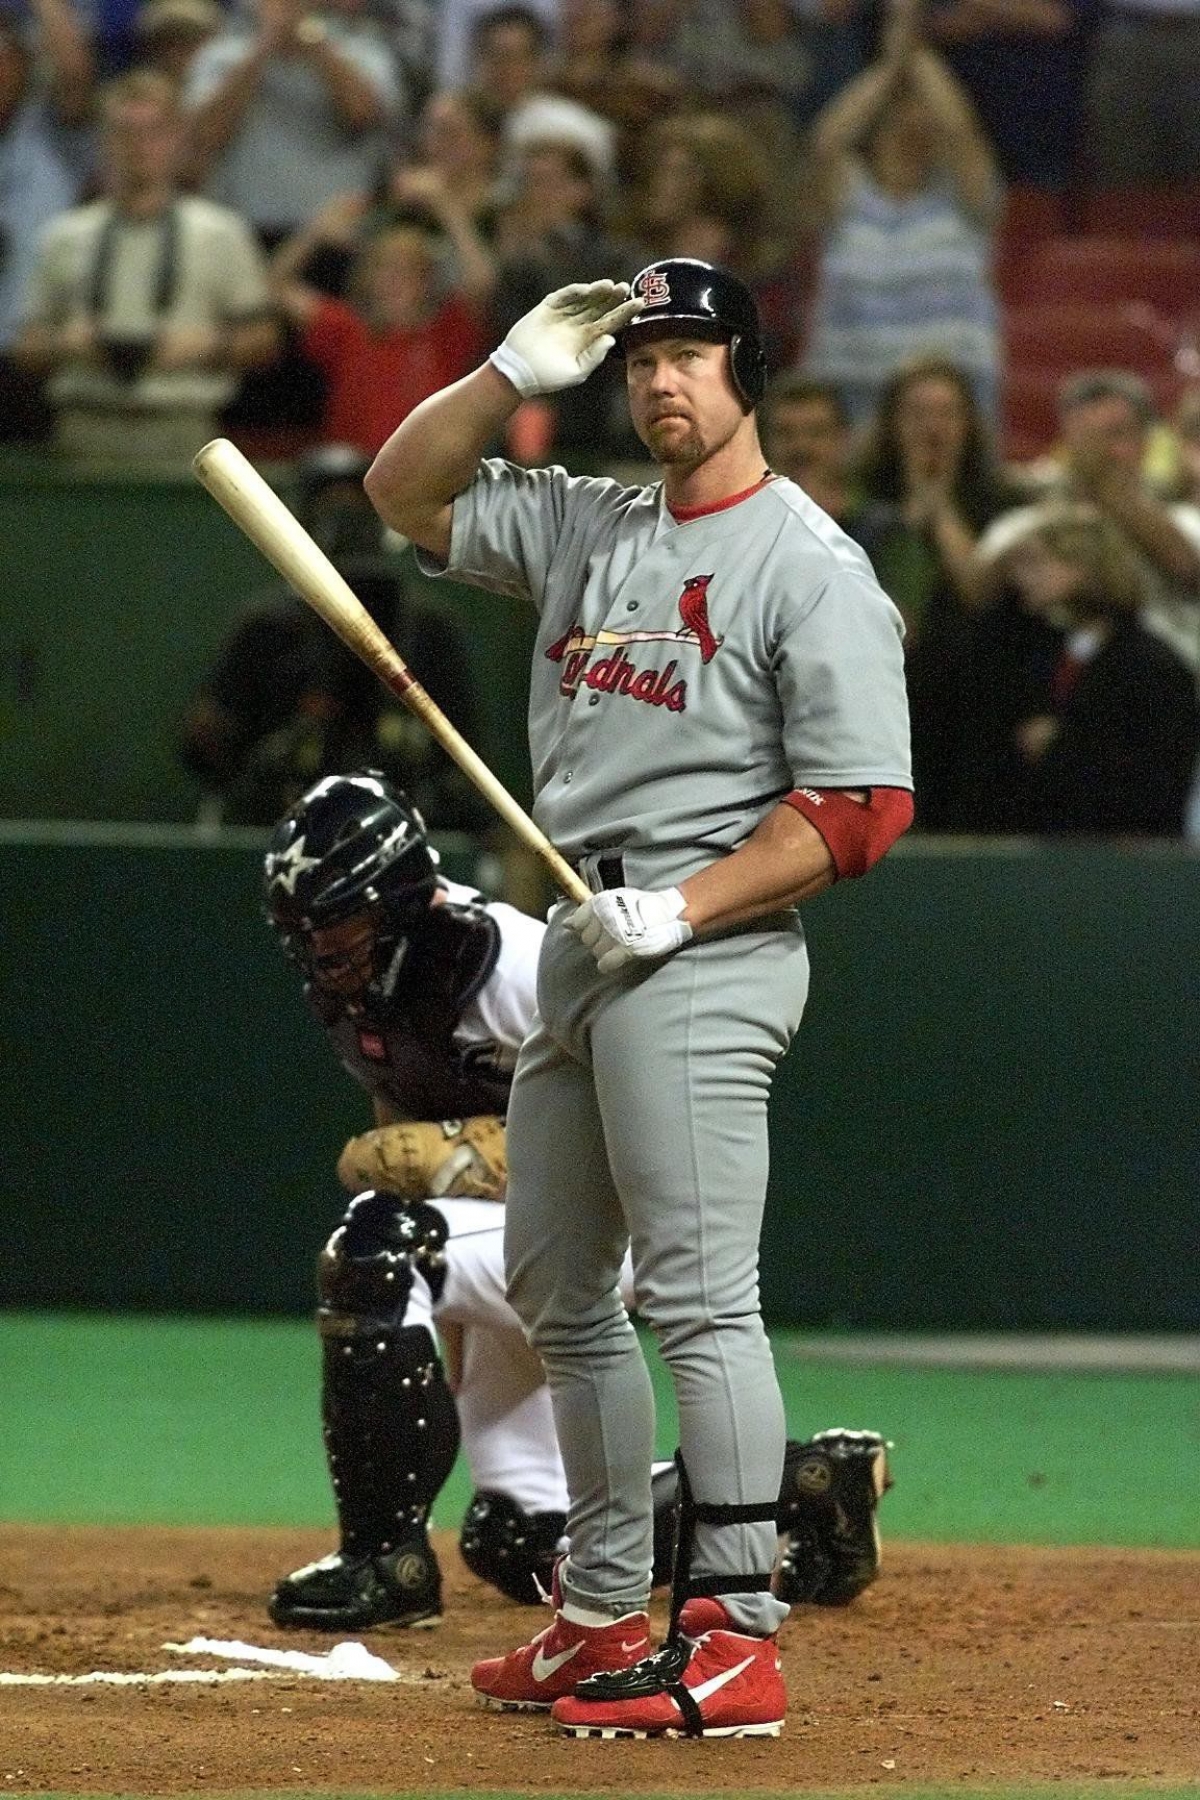 Not in Hall of Fame - 38. Mark McGwire